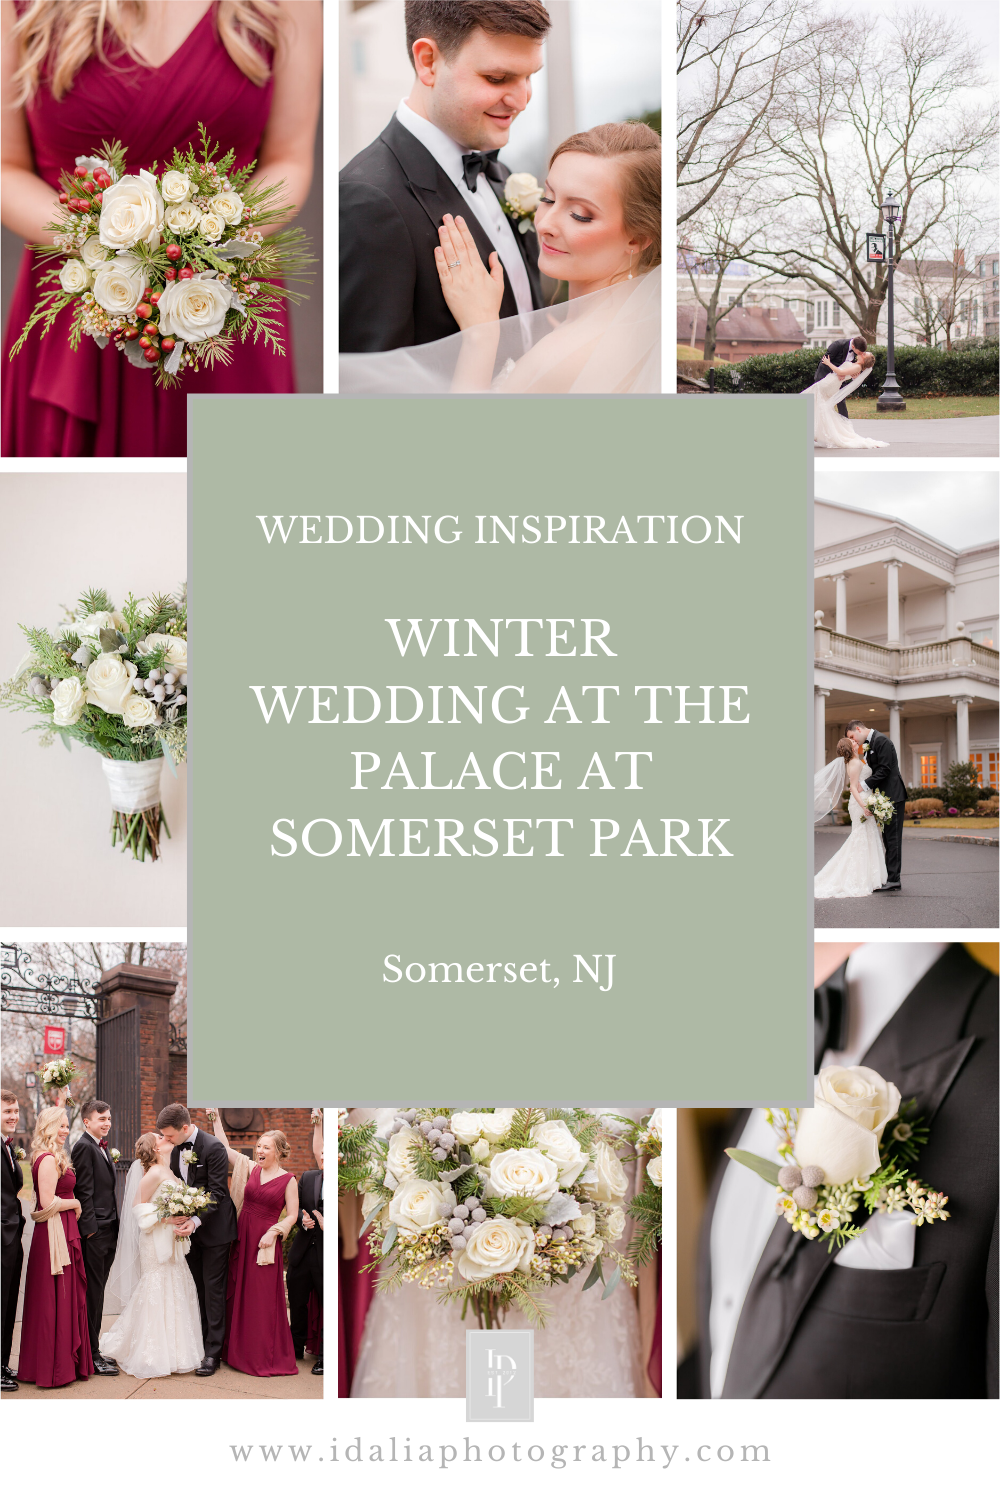 Looking for winter wedding inspiration? Check out this Winter Wedding at the Palace at Somerset Park!